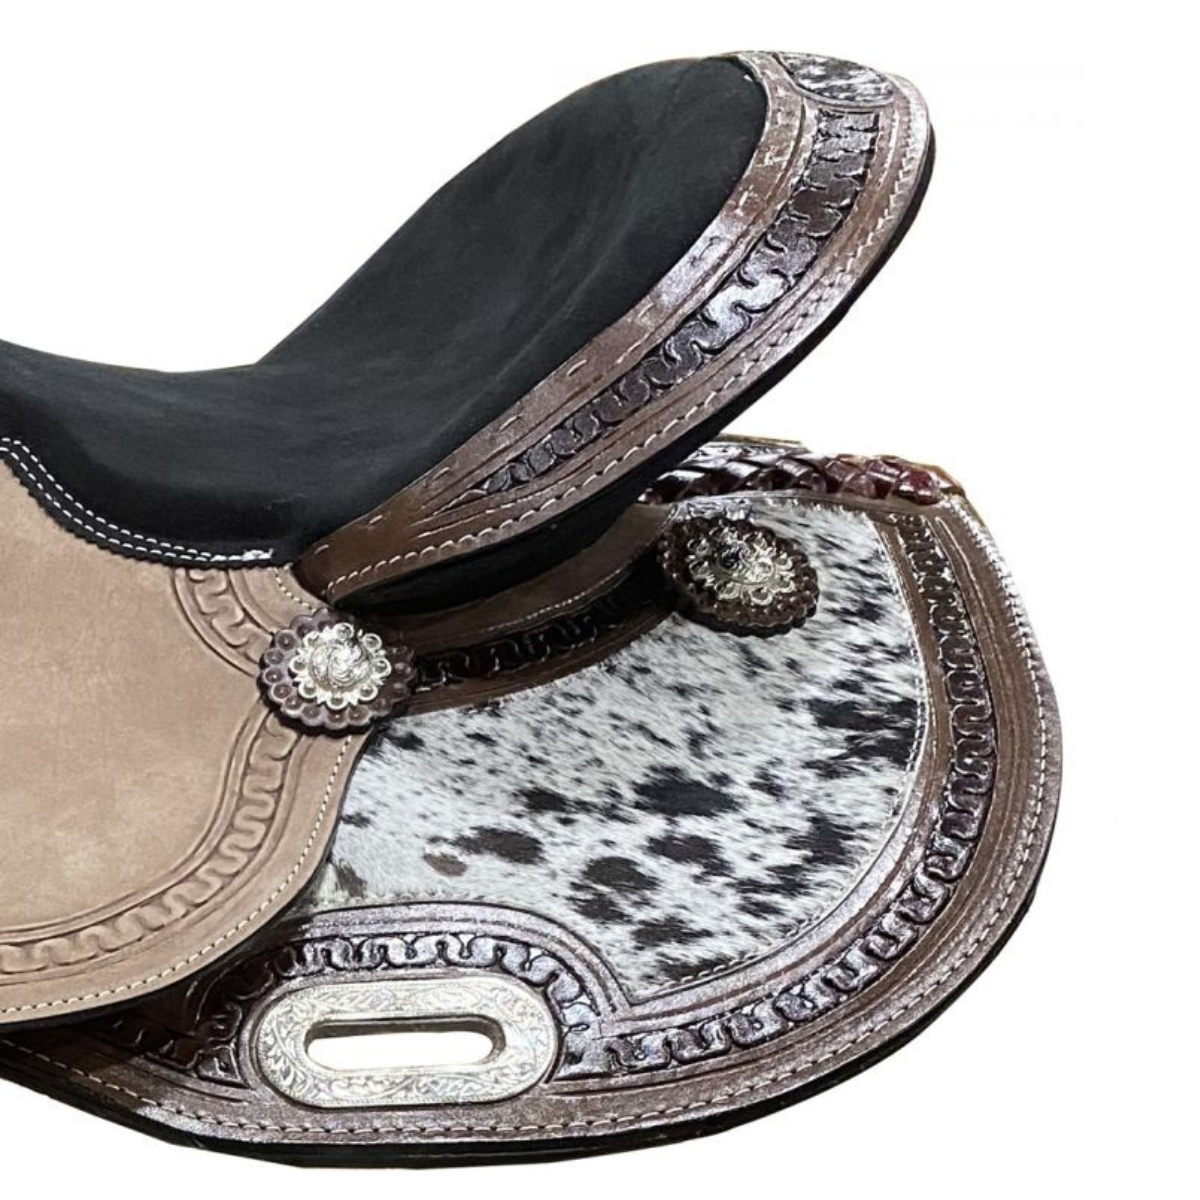 DOUBLE T 15" Barrel Style saddle with hair on cowhide inlay. - Double T Saddles